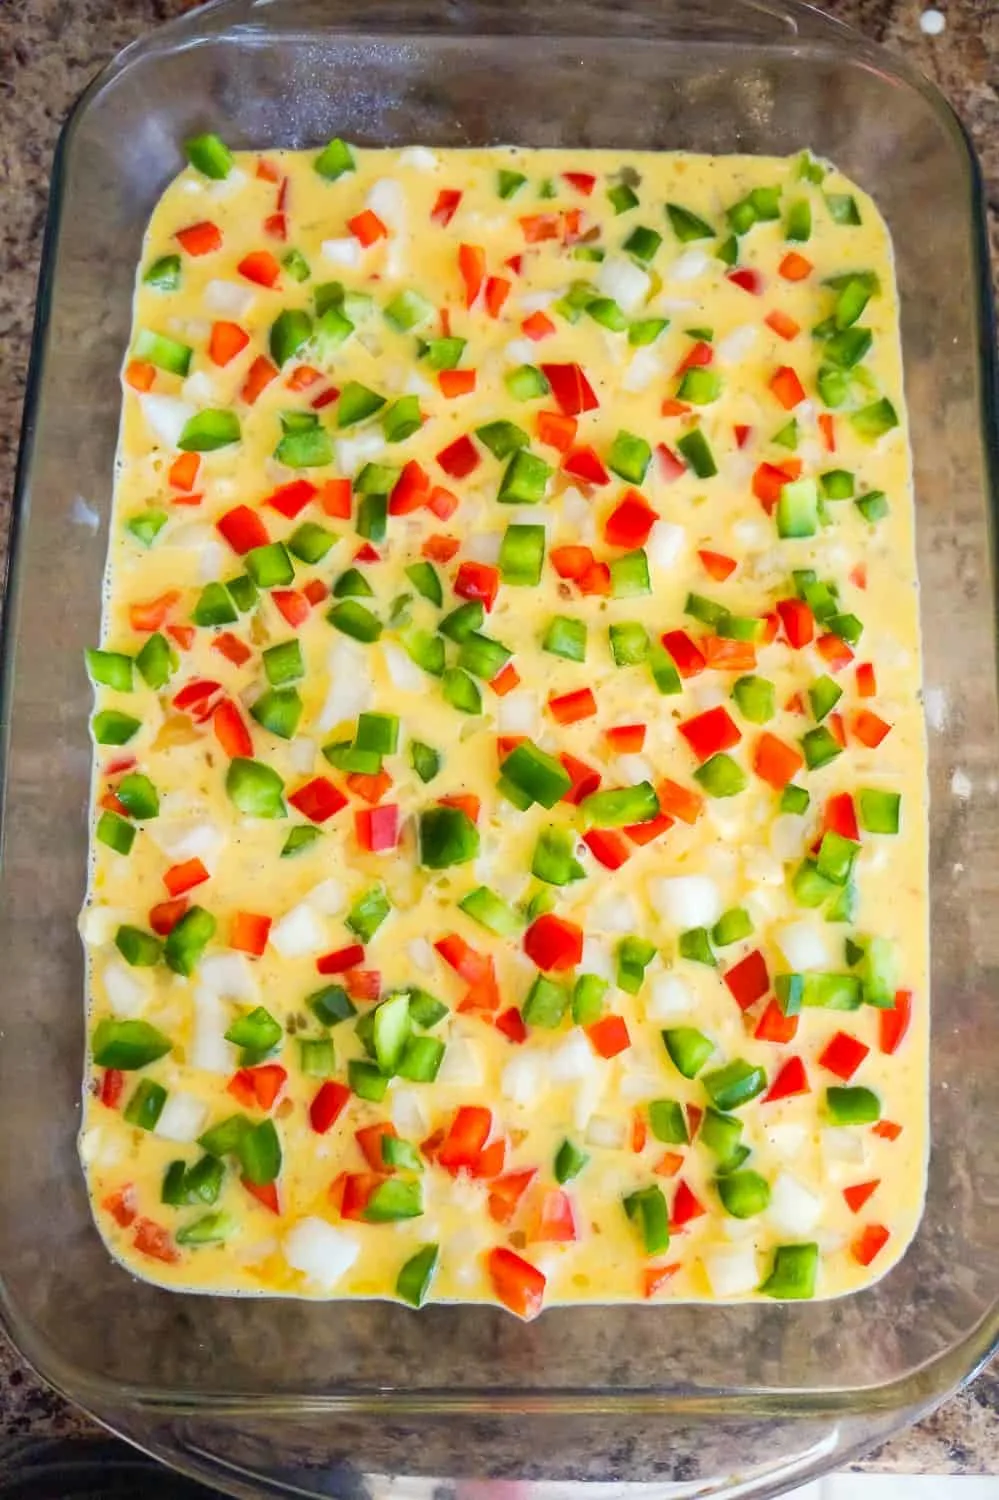 diced green peppers, red peppers and onions on top of egg casserole before baking